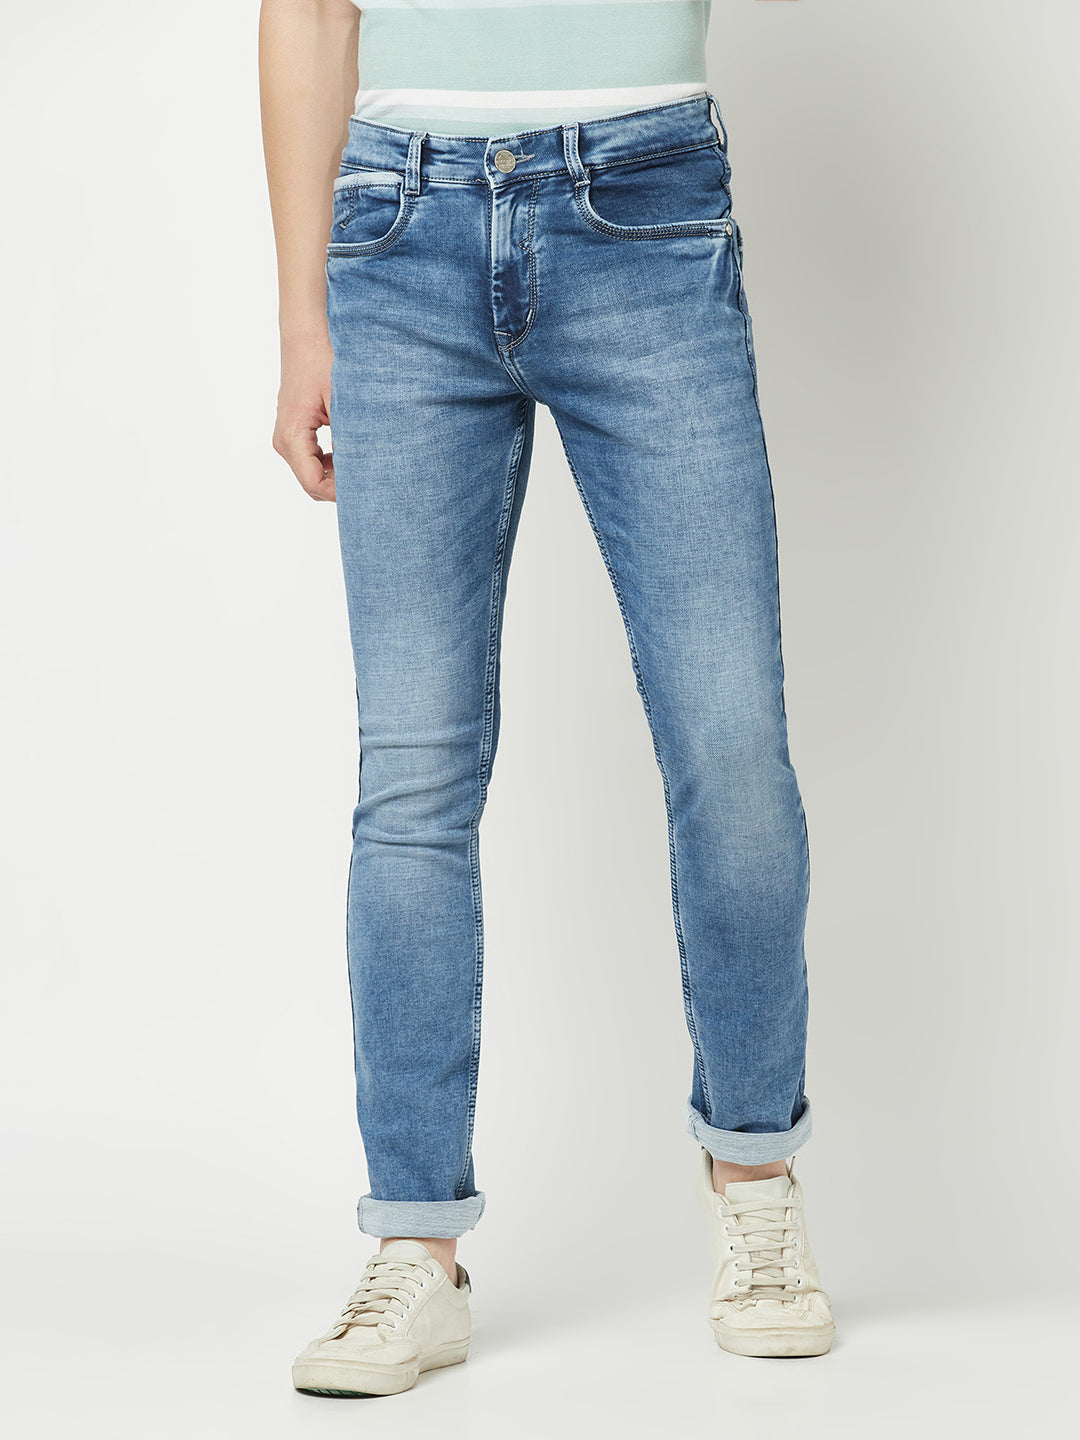  Blue Faded Defining Jeans